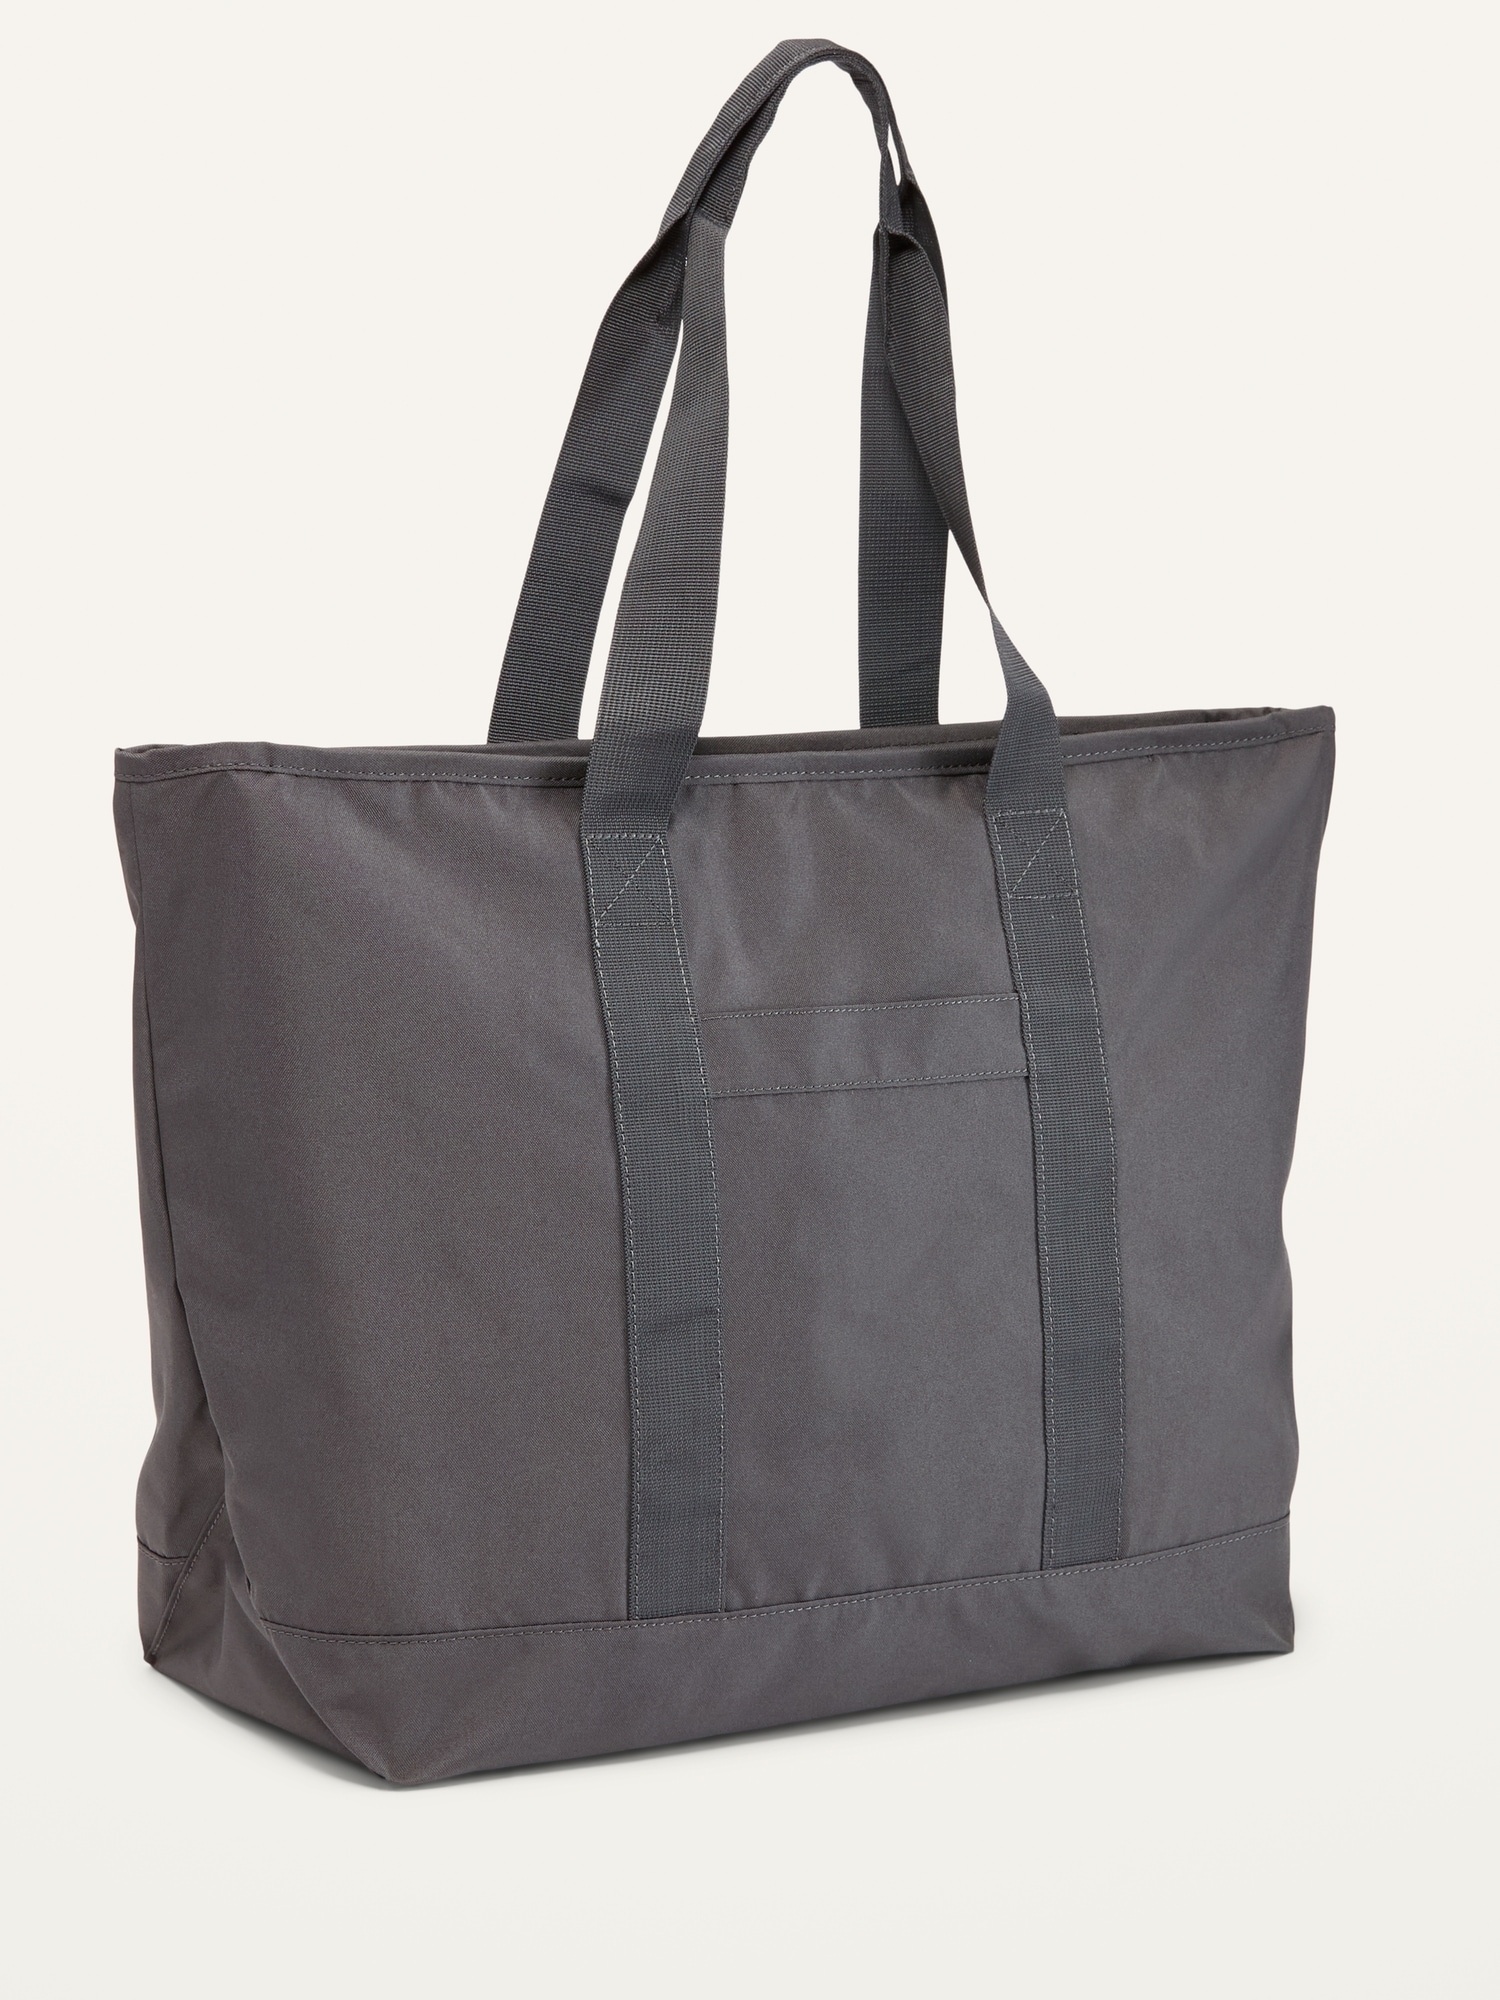 Extra-Large Canvas Tote Bag for Adults | Old Navy